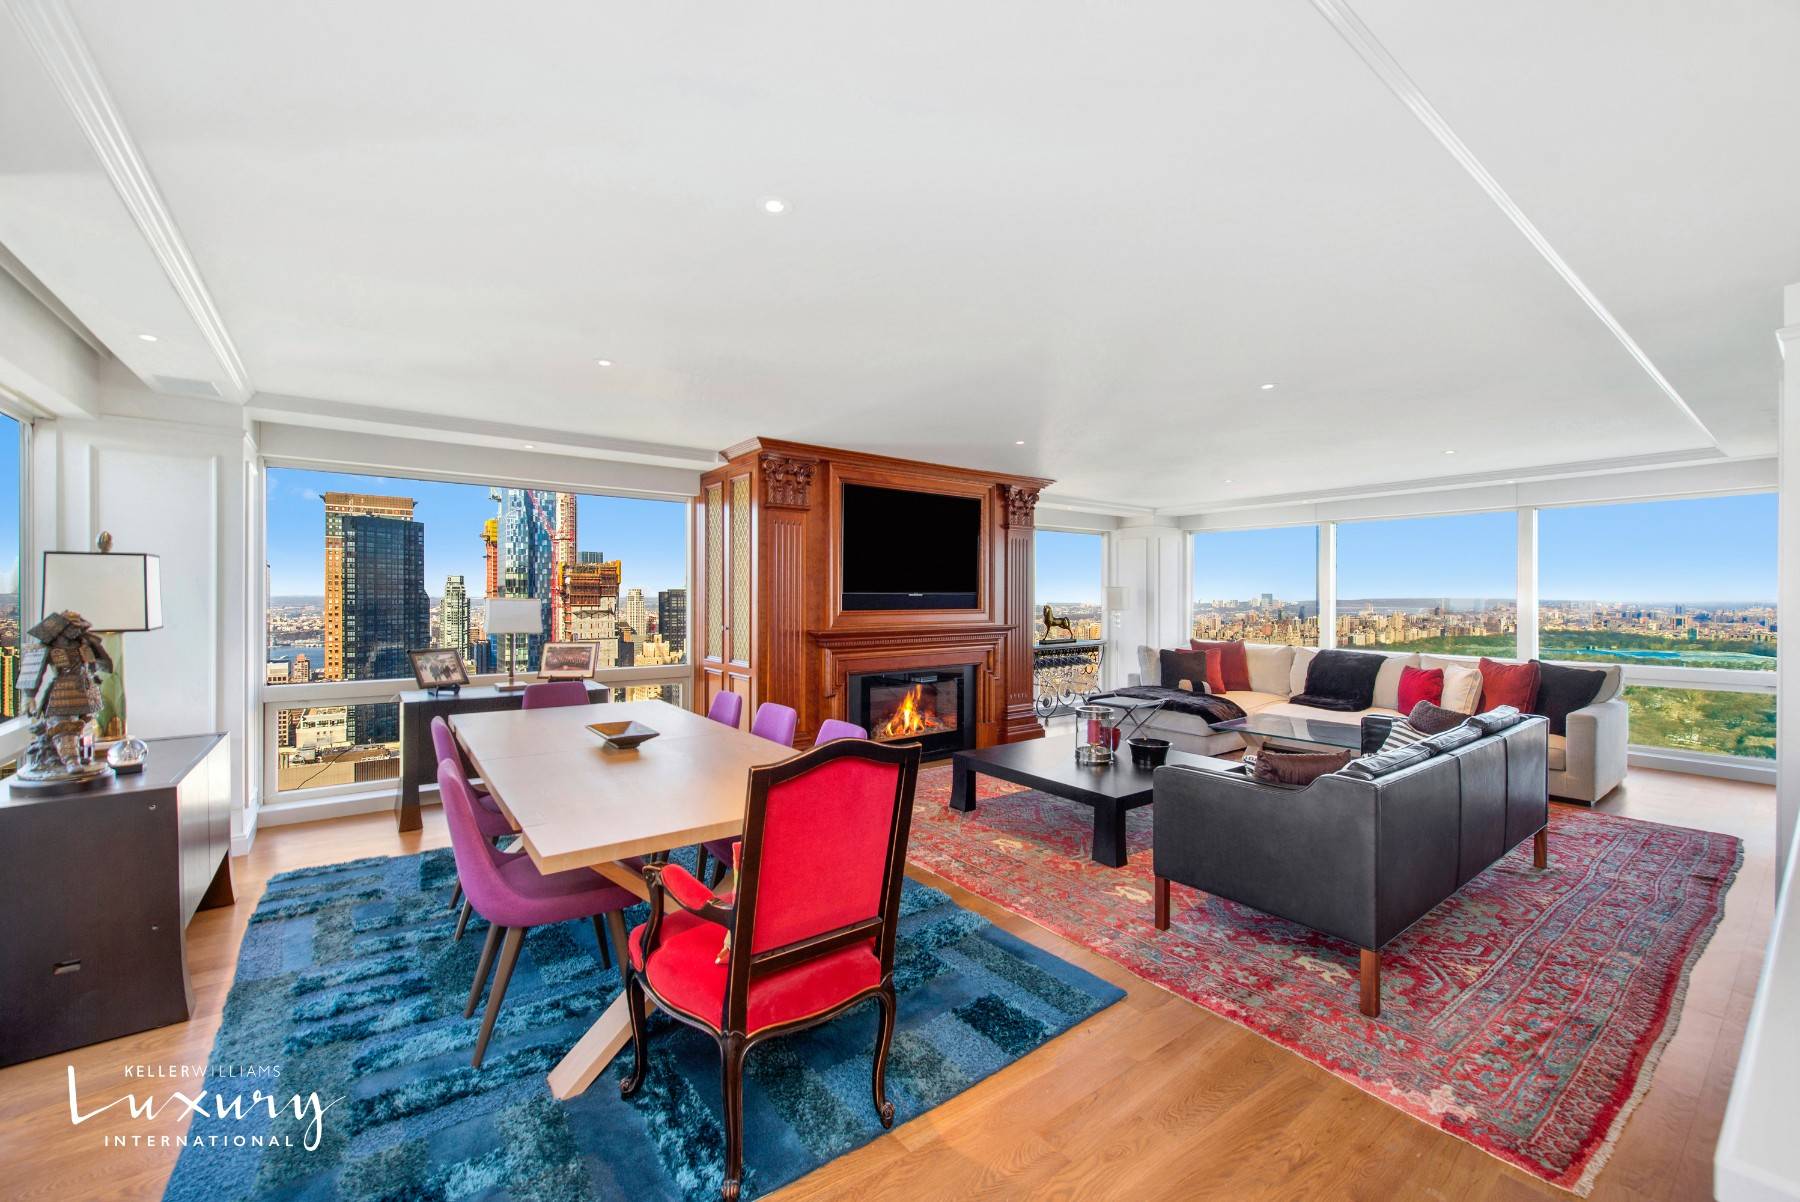 Apartment 61L in the upper reaches of Trump Tower.